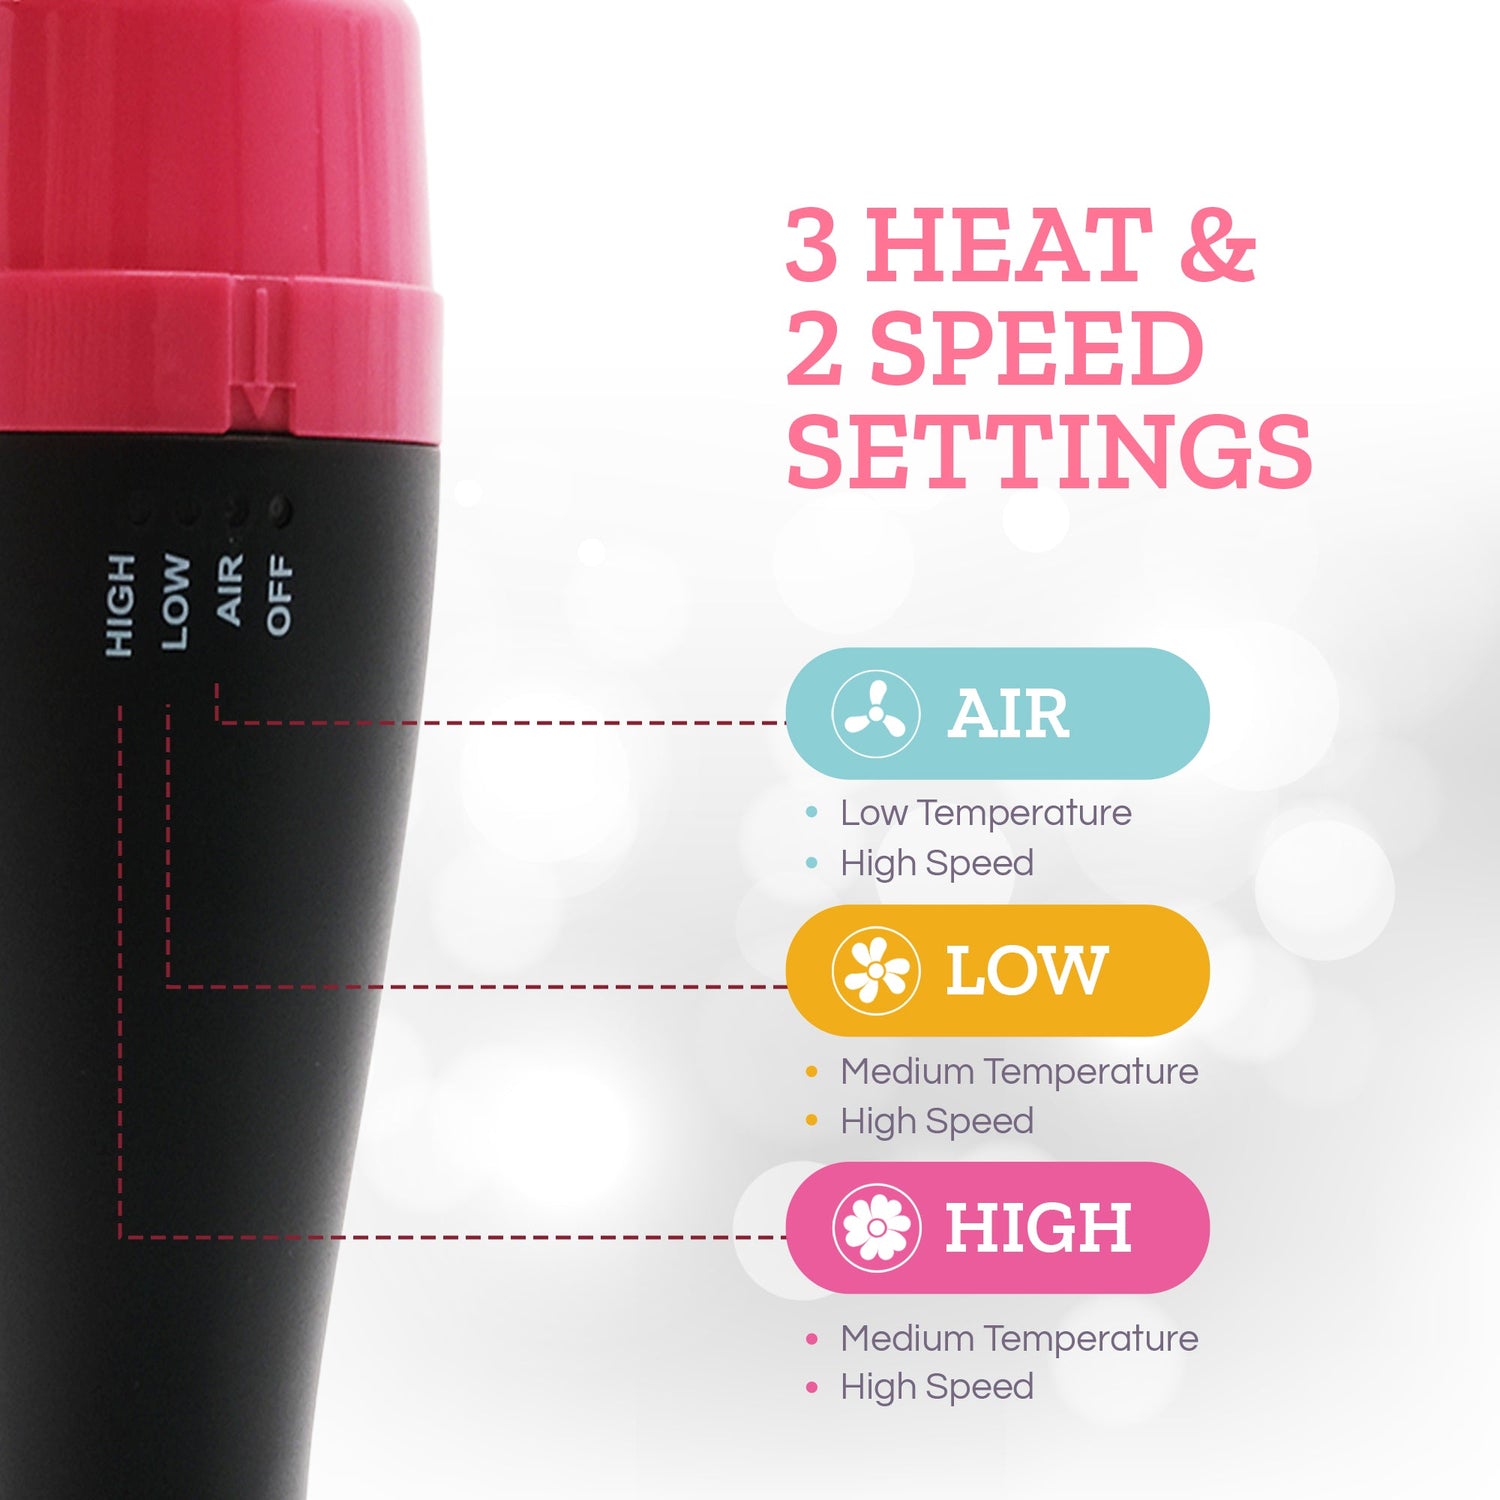 Couture Hair Pro Hot Air Brush - 3 in 1 Hair Straightening Brush, Volumizer & Dryer - Pink - Couture Hair Pro